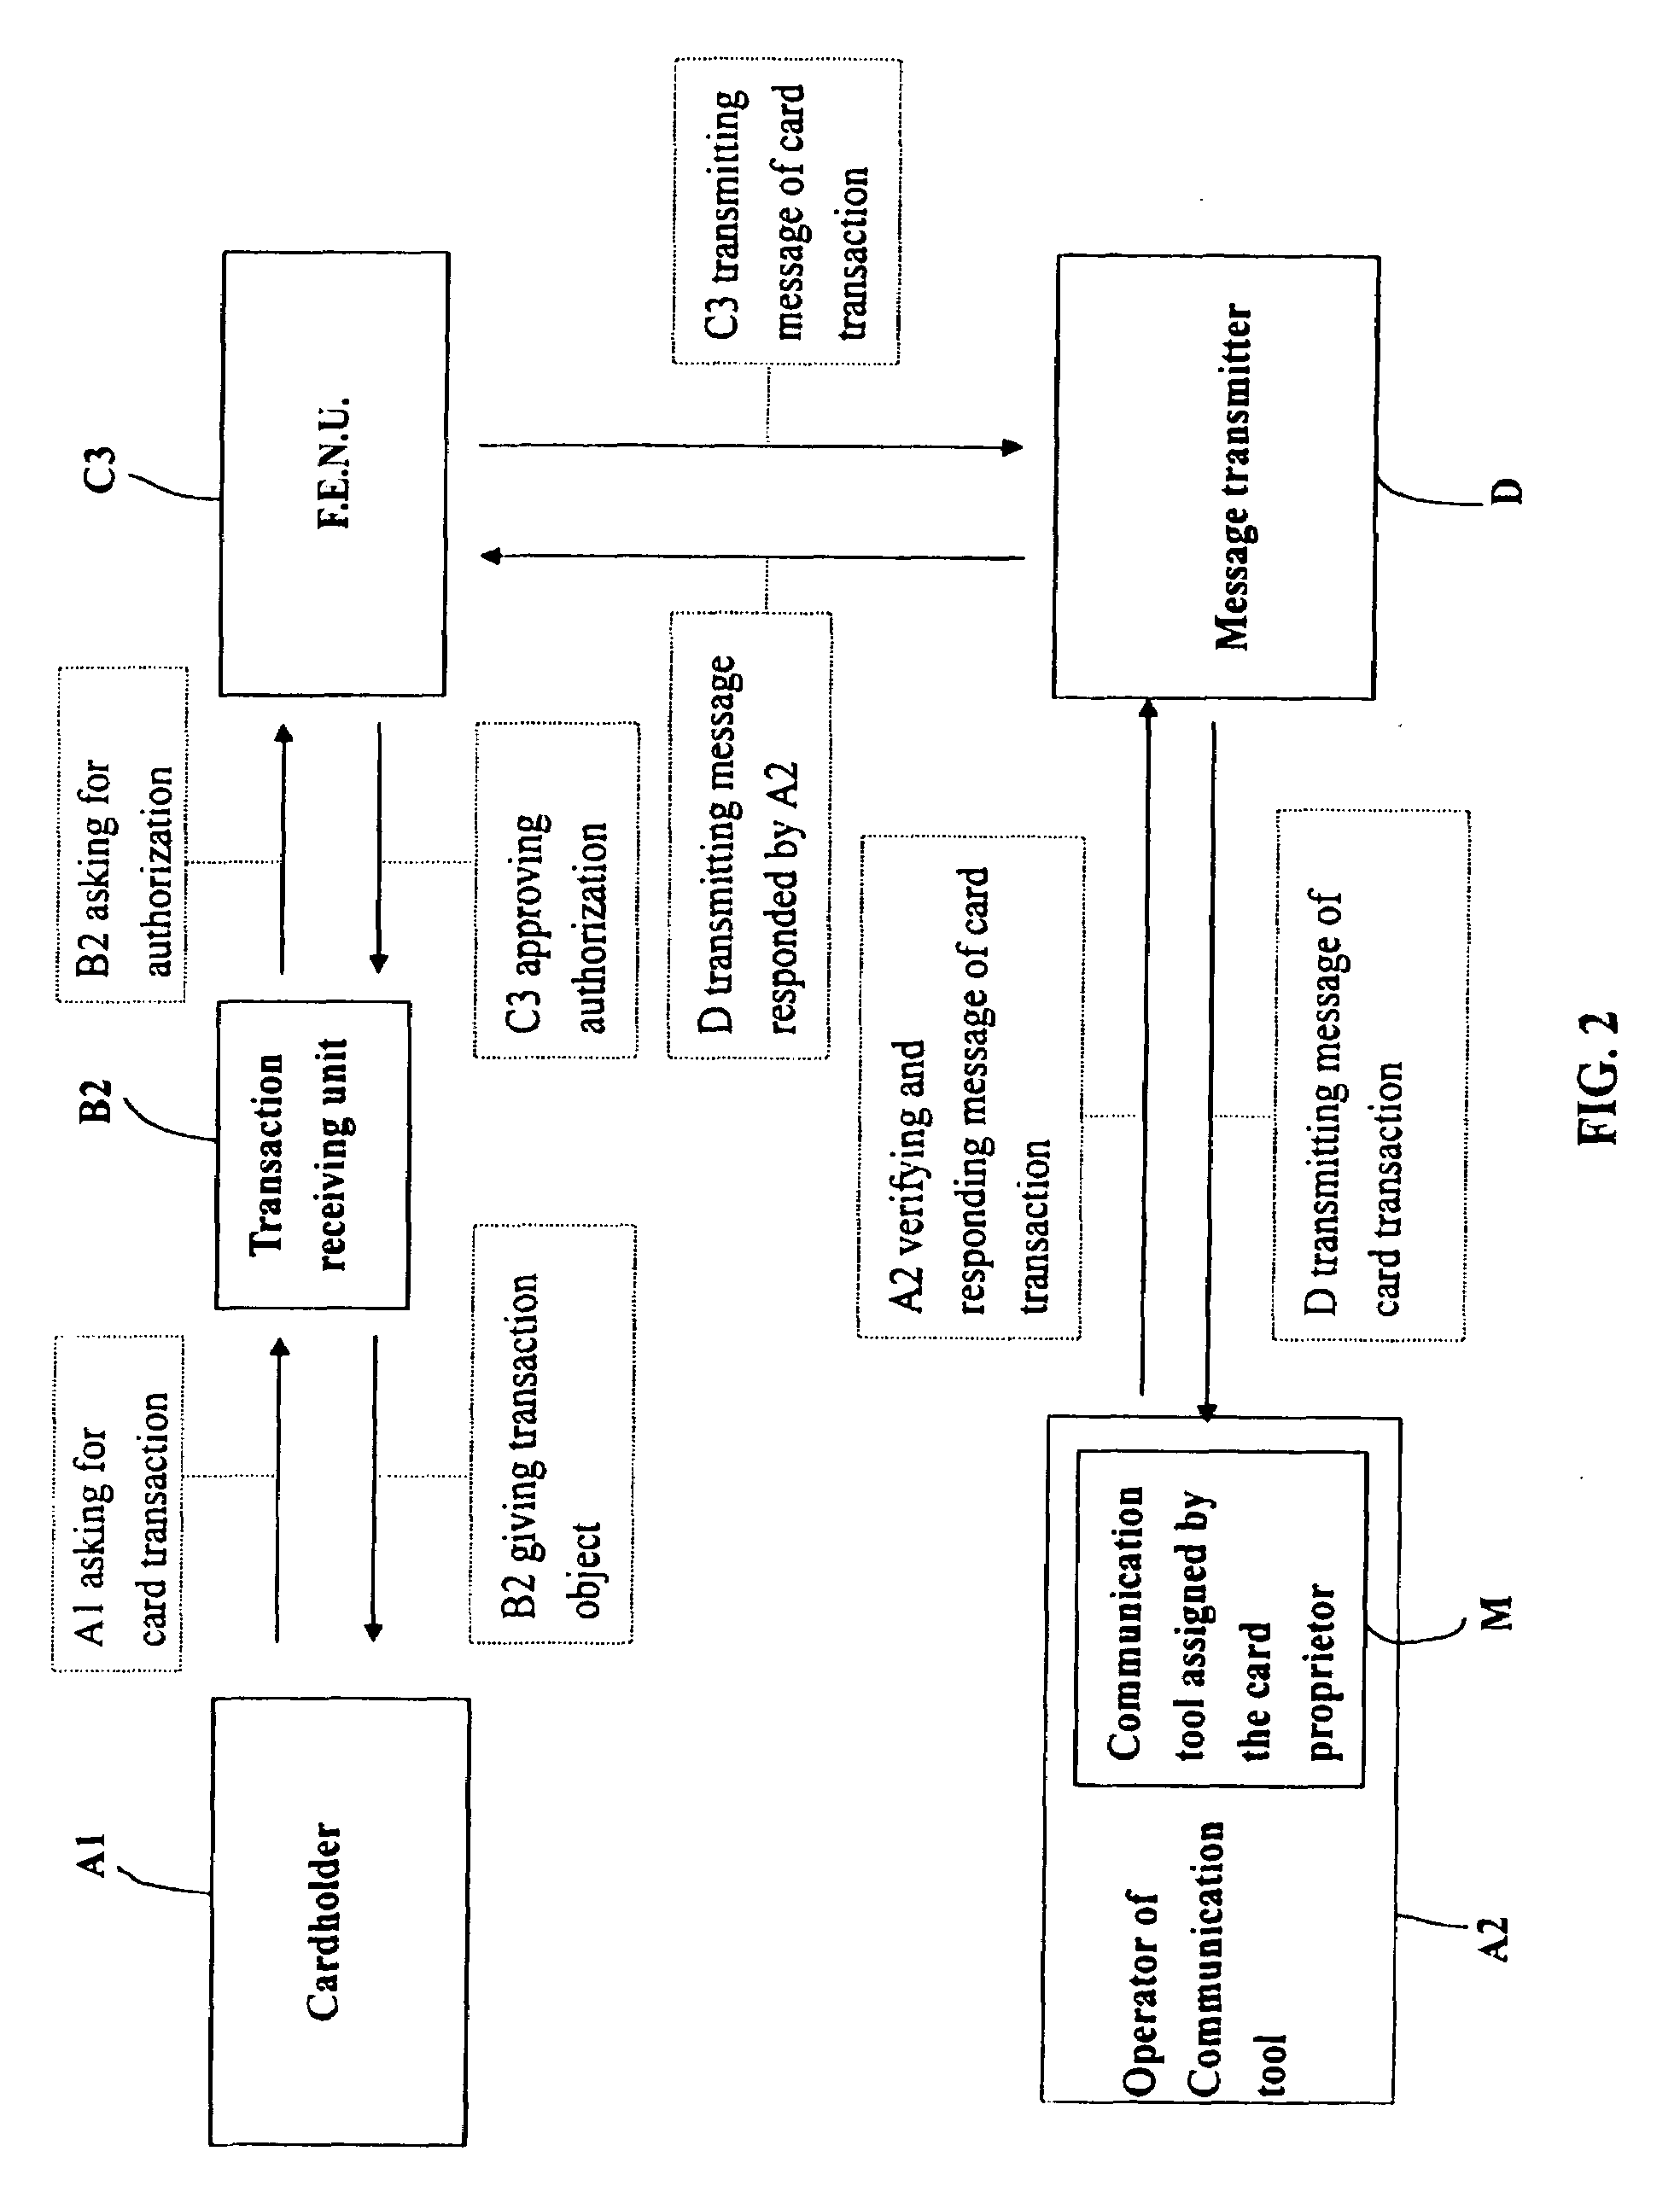 Method for securing card transaction by using mobile device